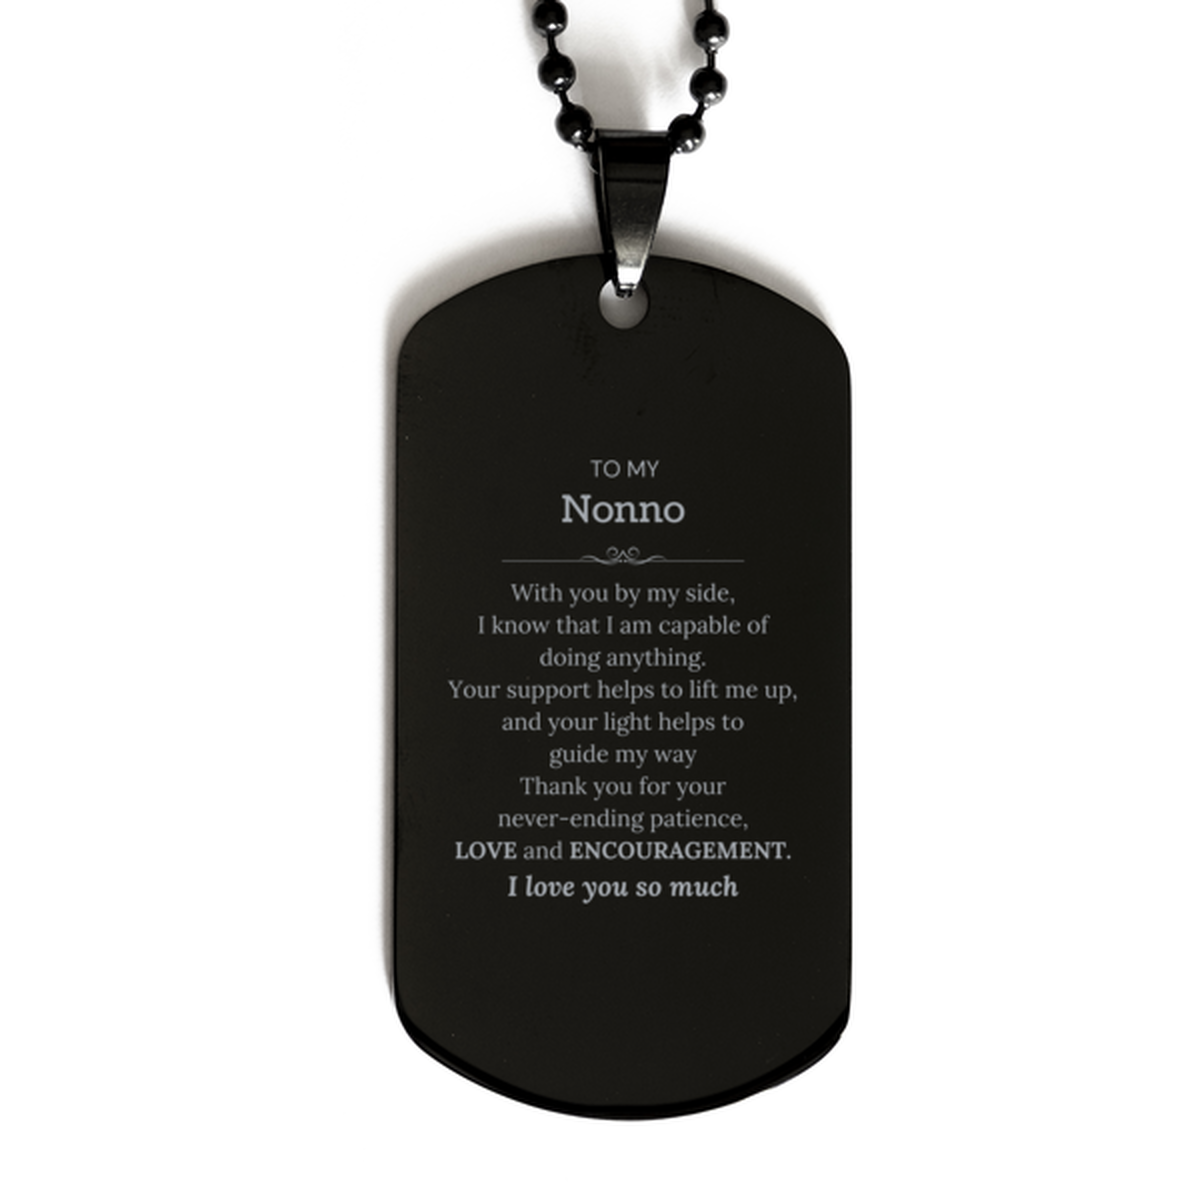 Appreciation Nonno Black Dog Tag Gifts, To My Nonno Birthday Christmas Wedding Keepsake Gifts for Nonno With you by my side, I know that I am capable of doing anything. I love you so much